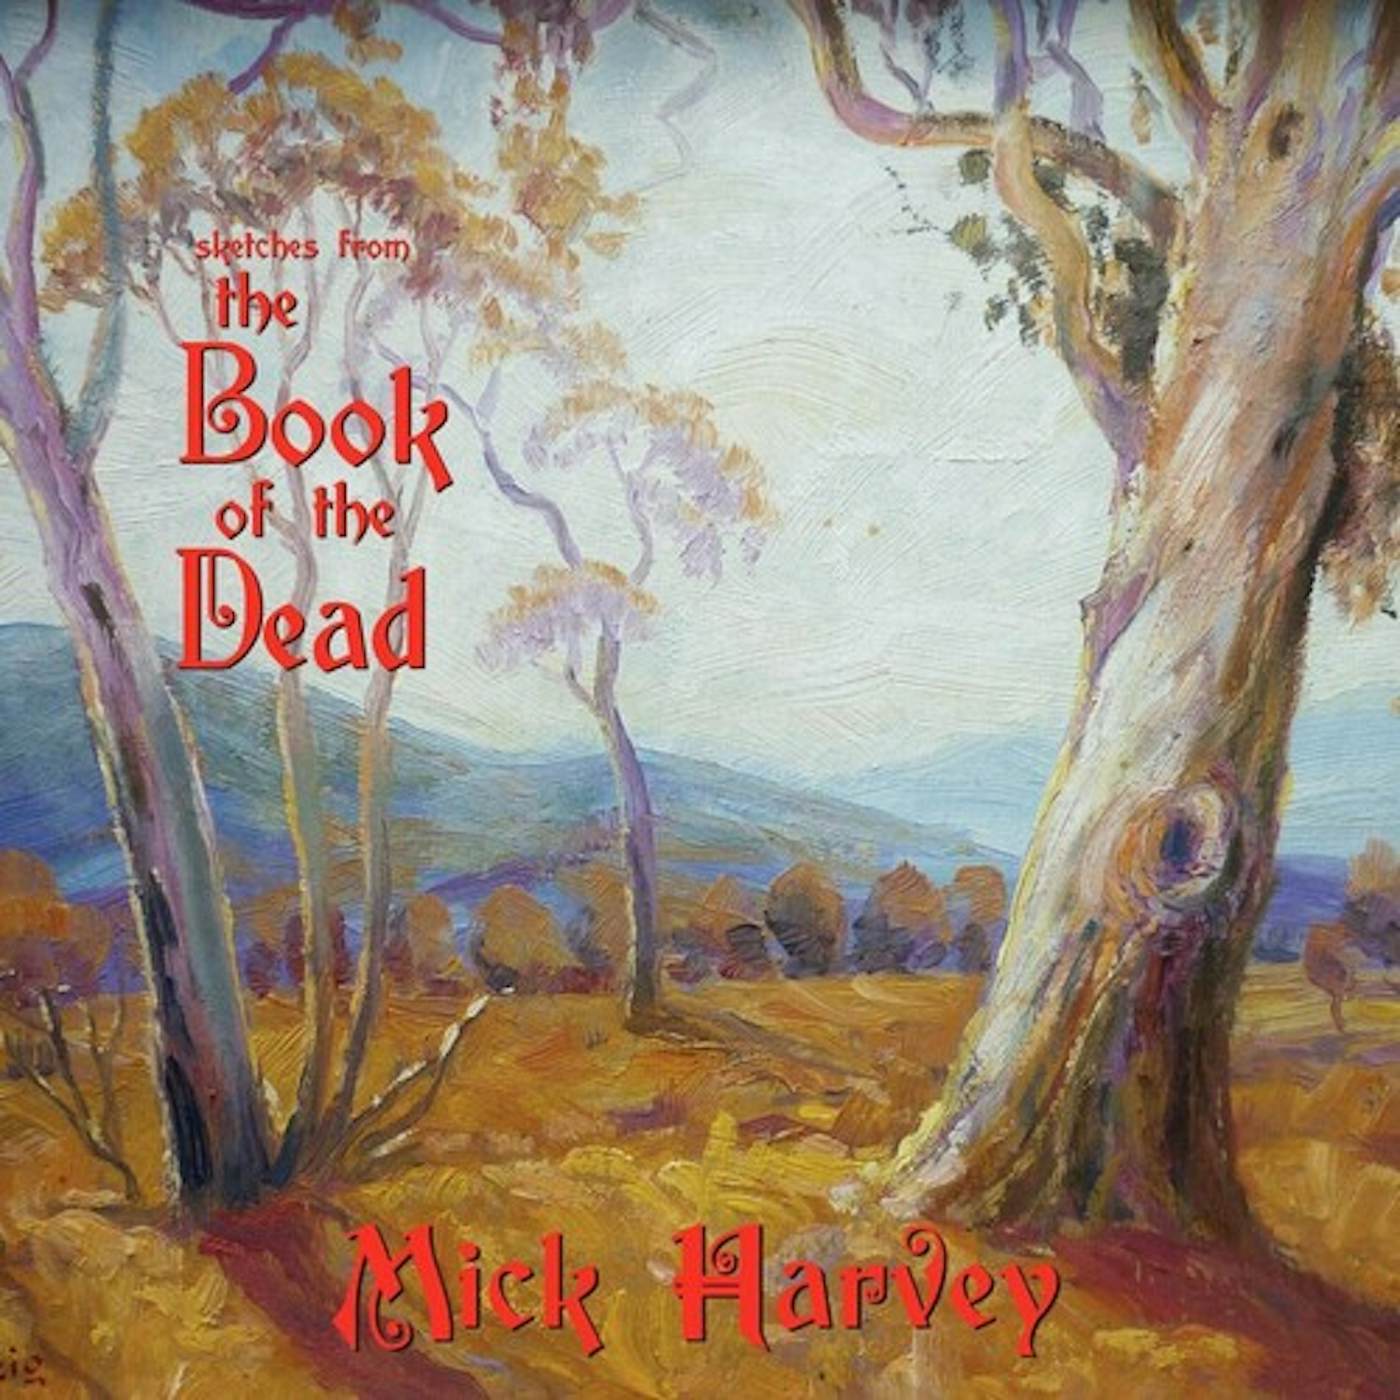 Mick Harvey Sketches from the Book of the Dead Vinyl Record